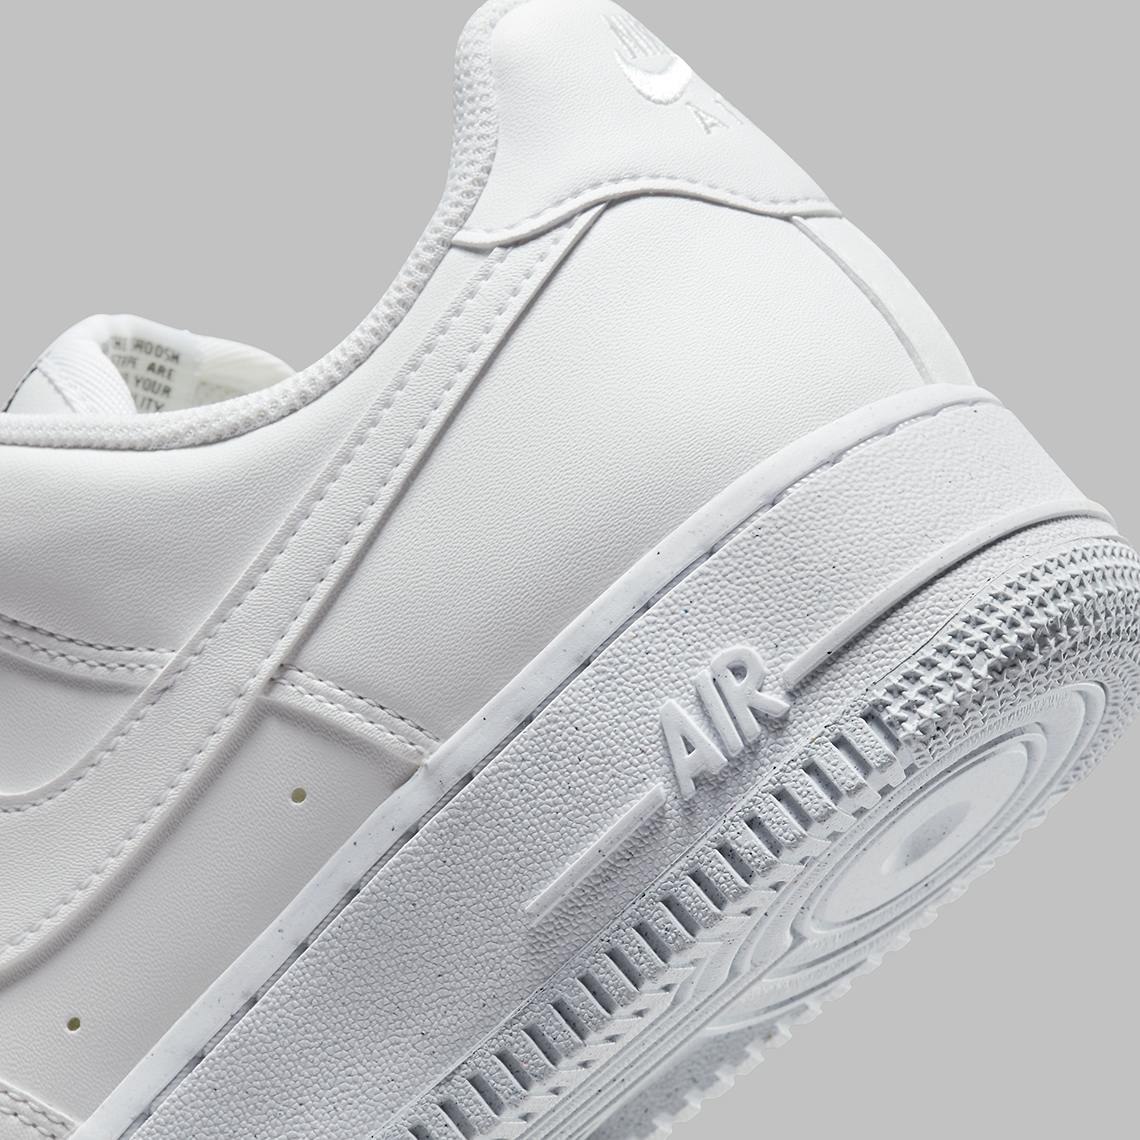 Nike Air Force 1 Move to Zero DC9486-101 Release Date | SneakerNews.com